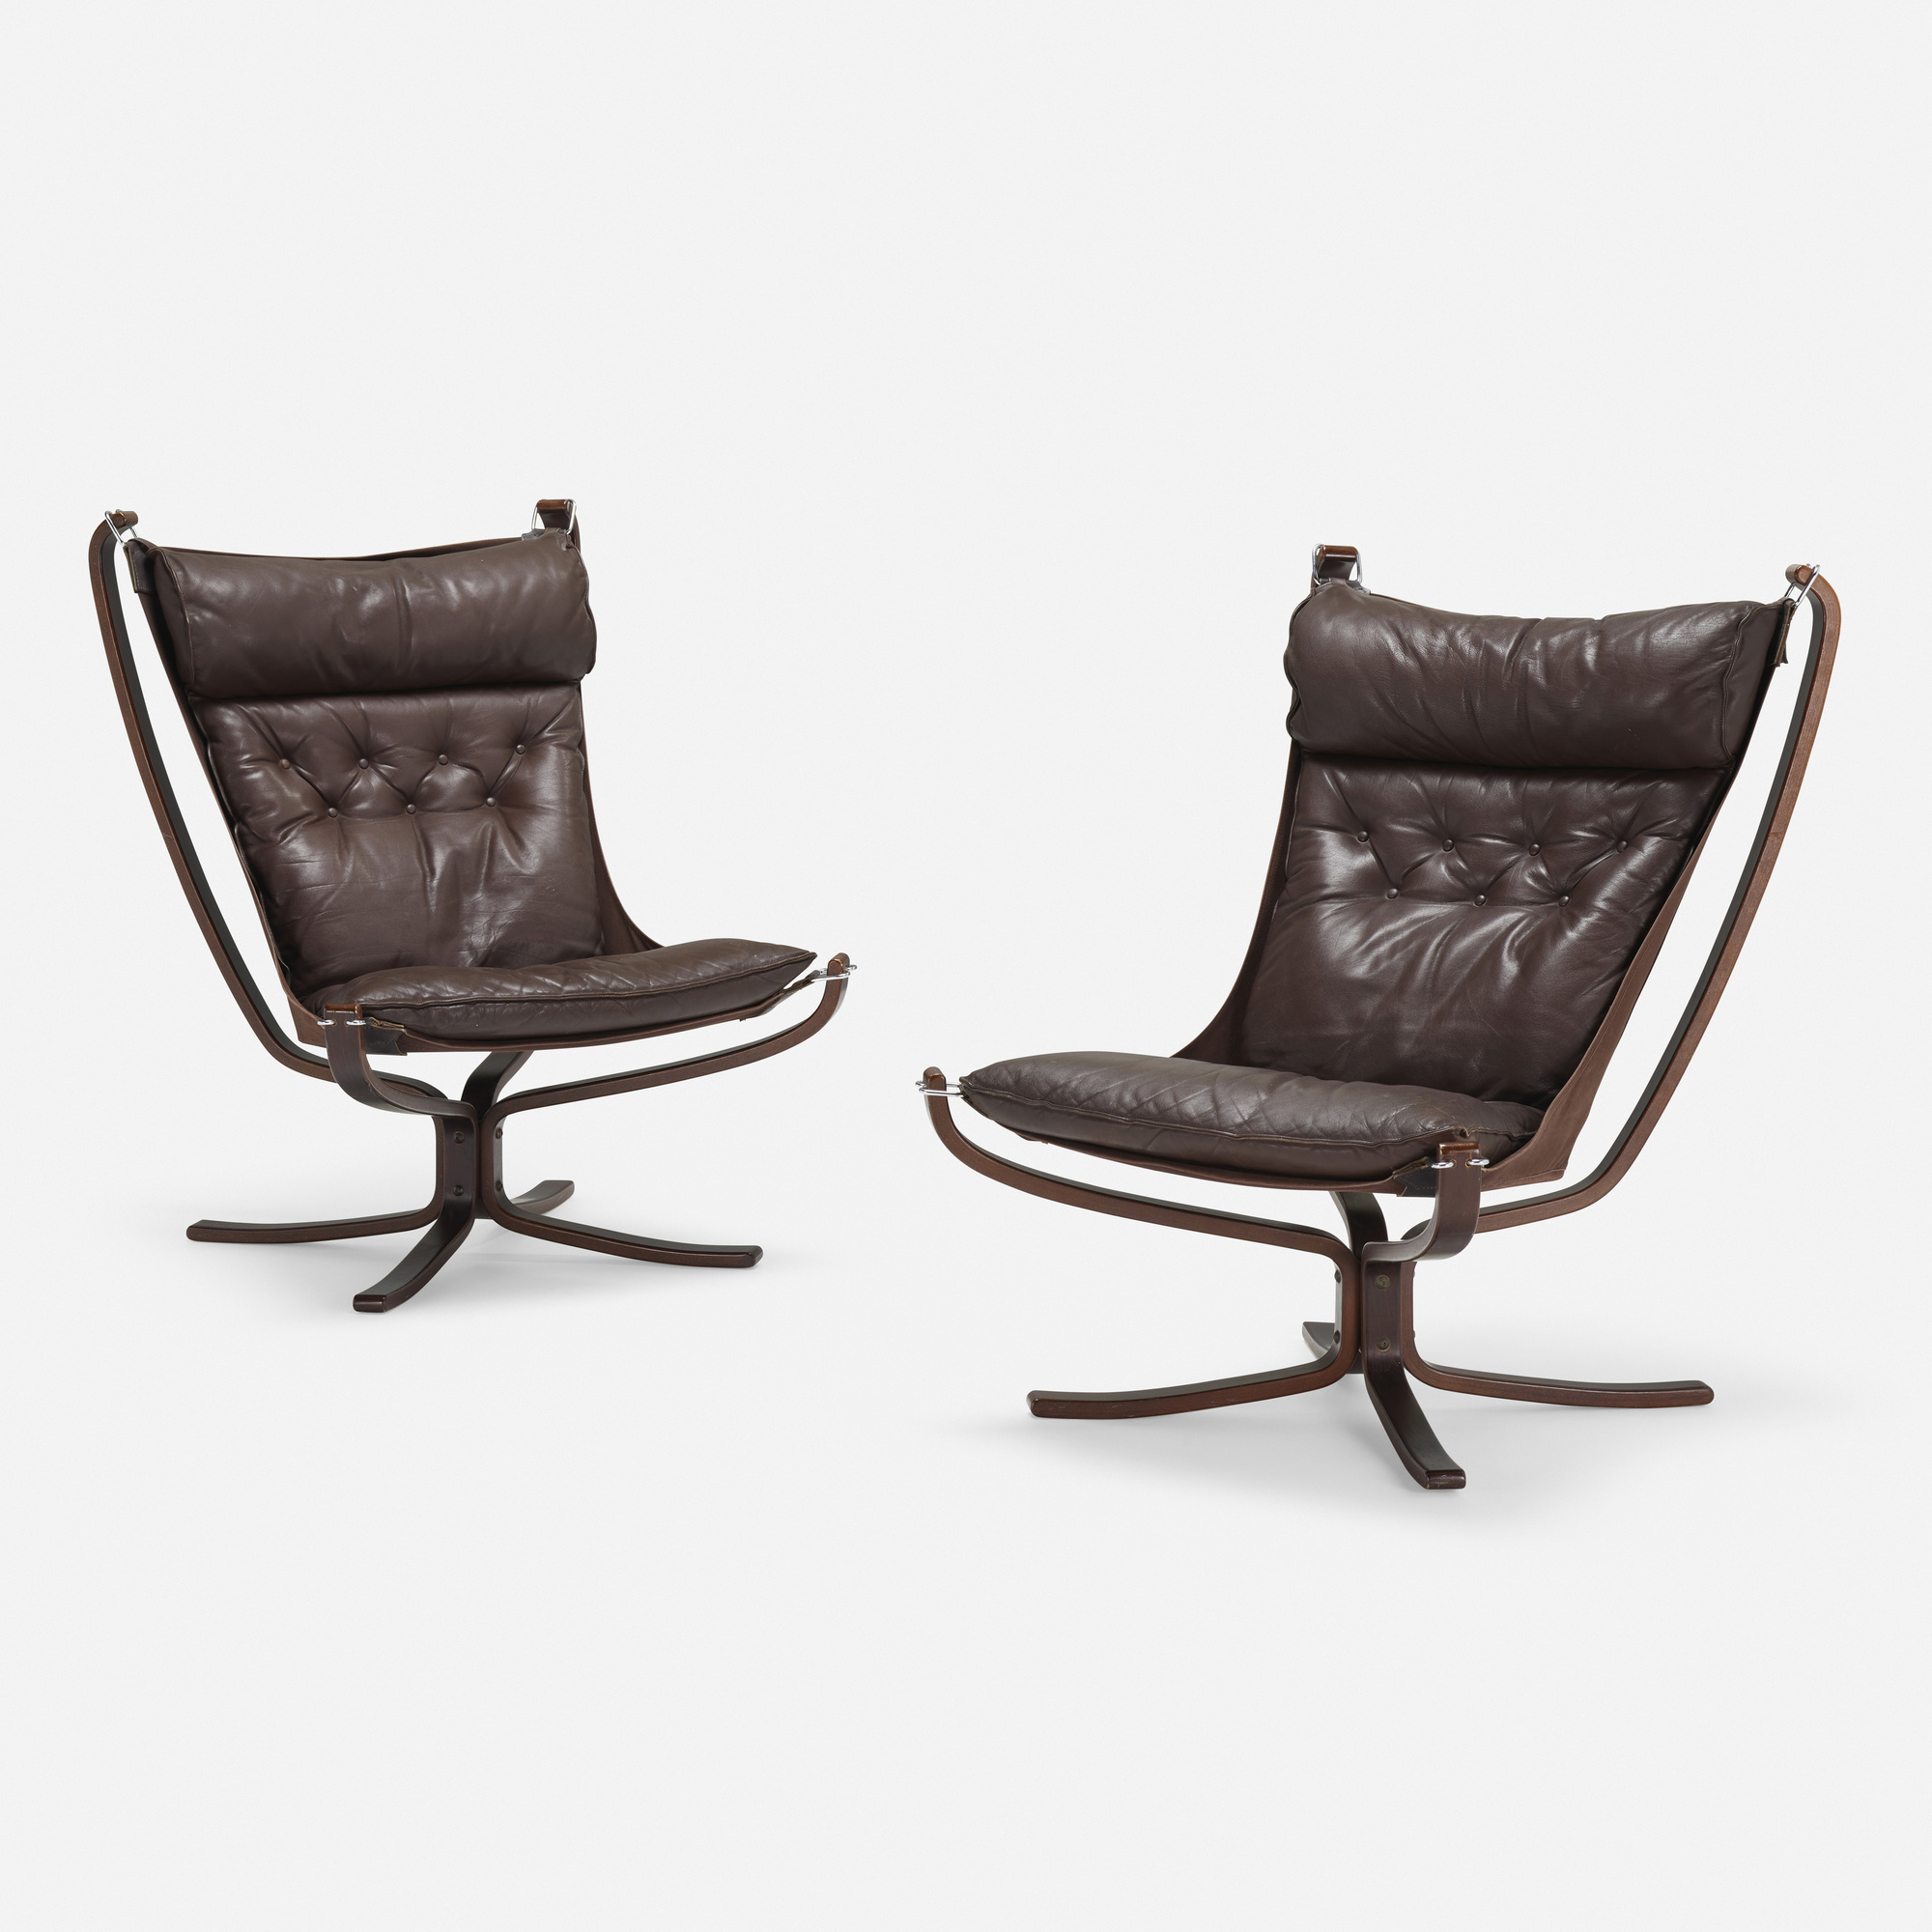 325: SIGURD RESELL, Falcon chairs, pair < Essential Design, 12 